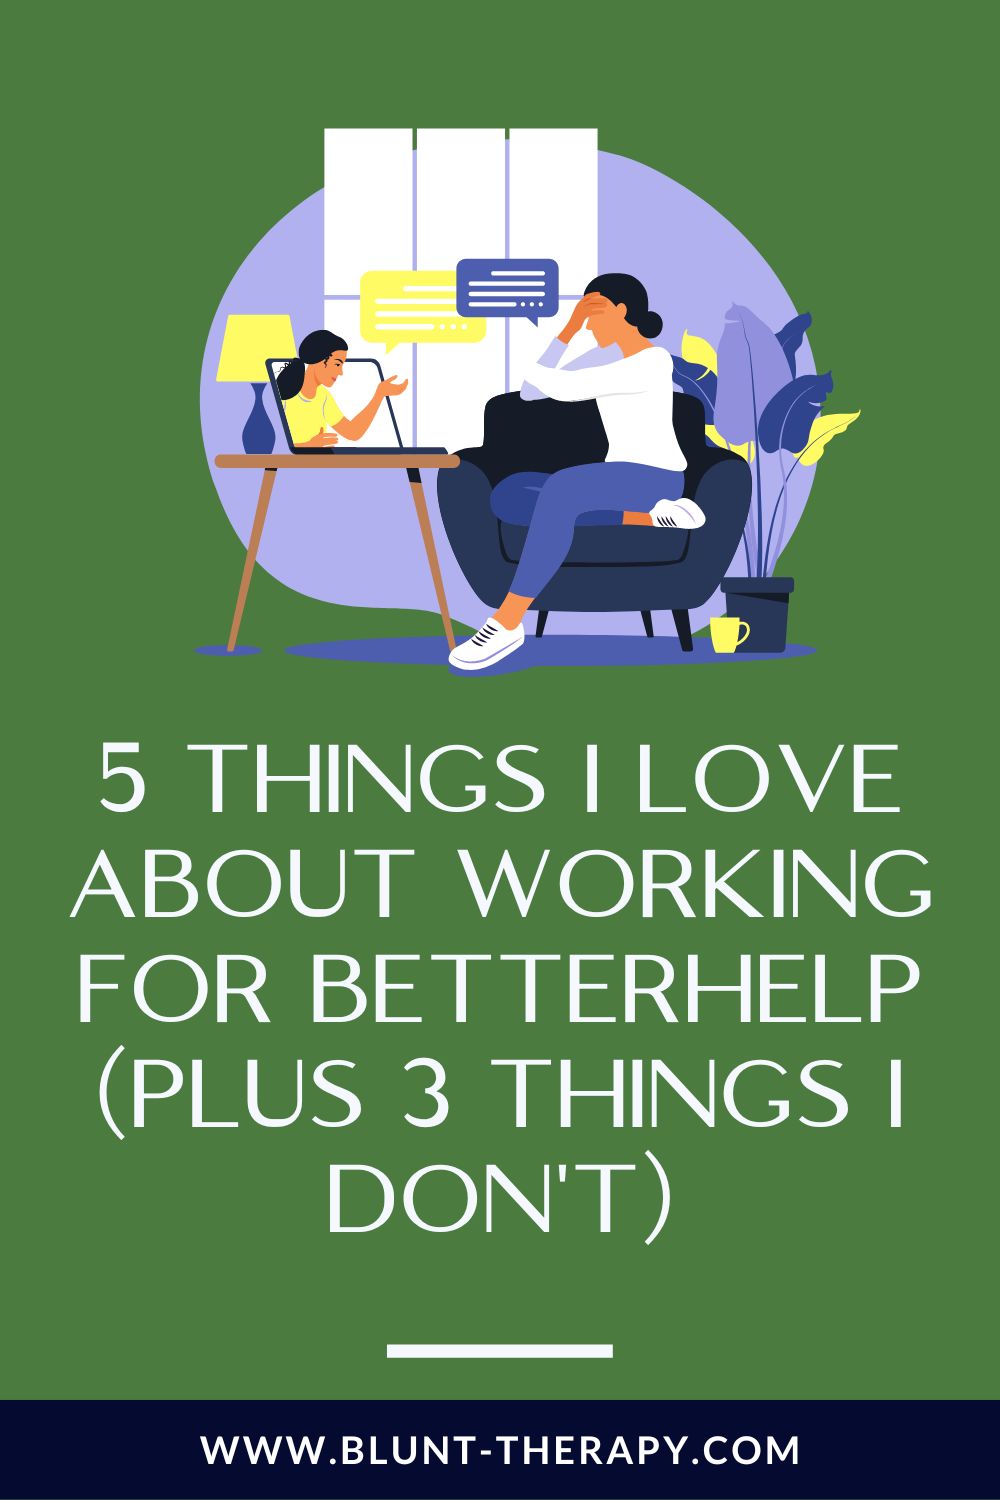 5 Things I Love About Working for BetterHelp (Plus 3 Things I Don’t)